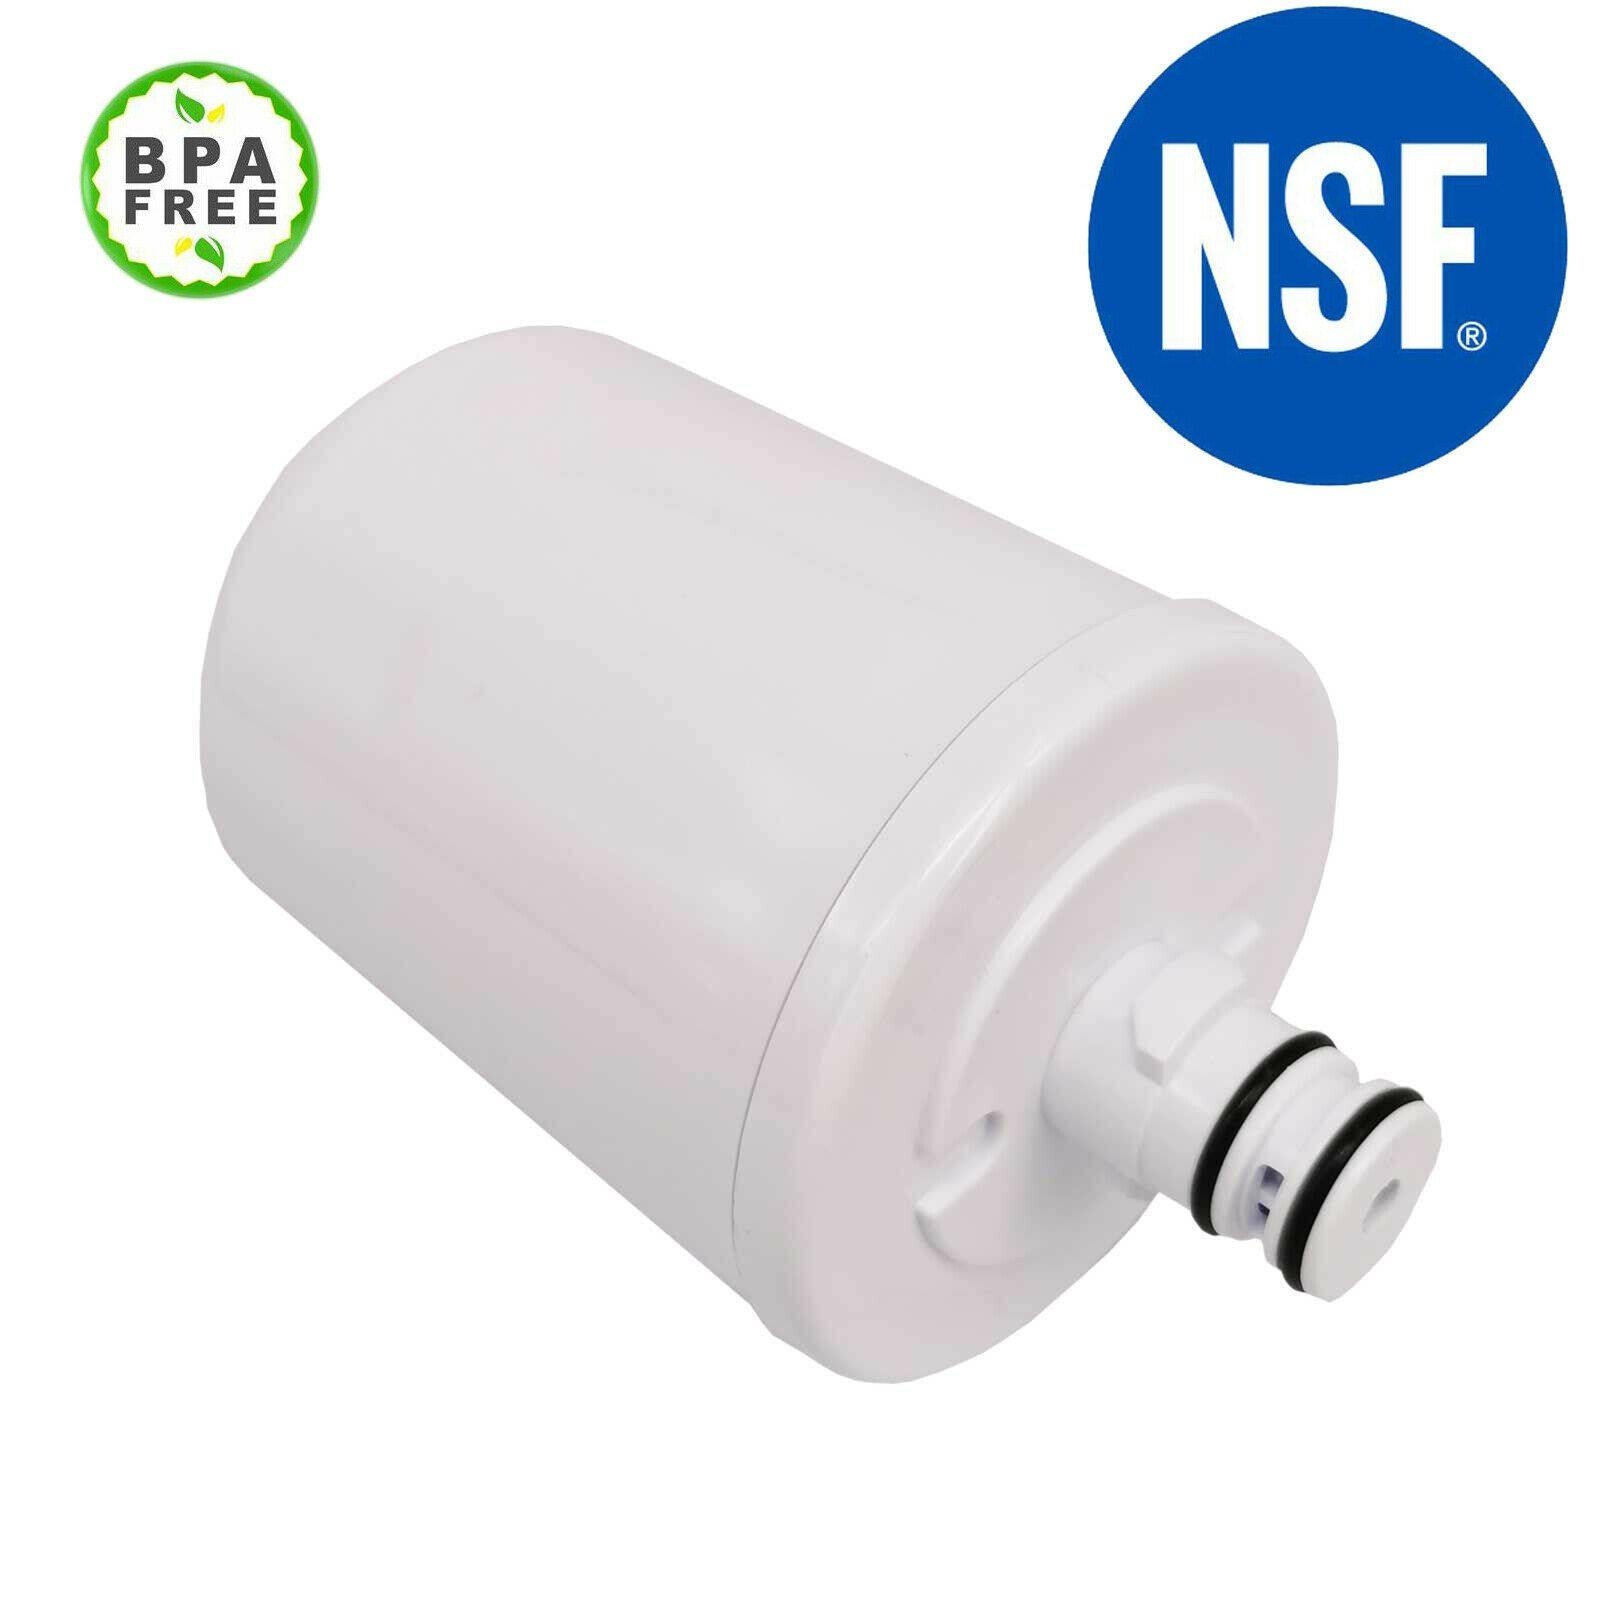 Fridge Water Filter Compatible For LG LT500P GC-P197WFS GC-L197STF GR-B247WVS Sparesbarn